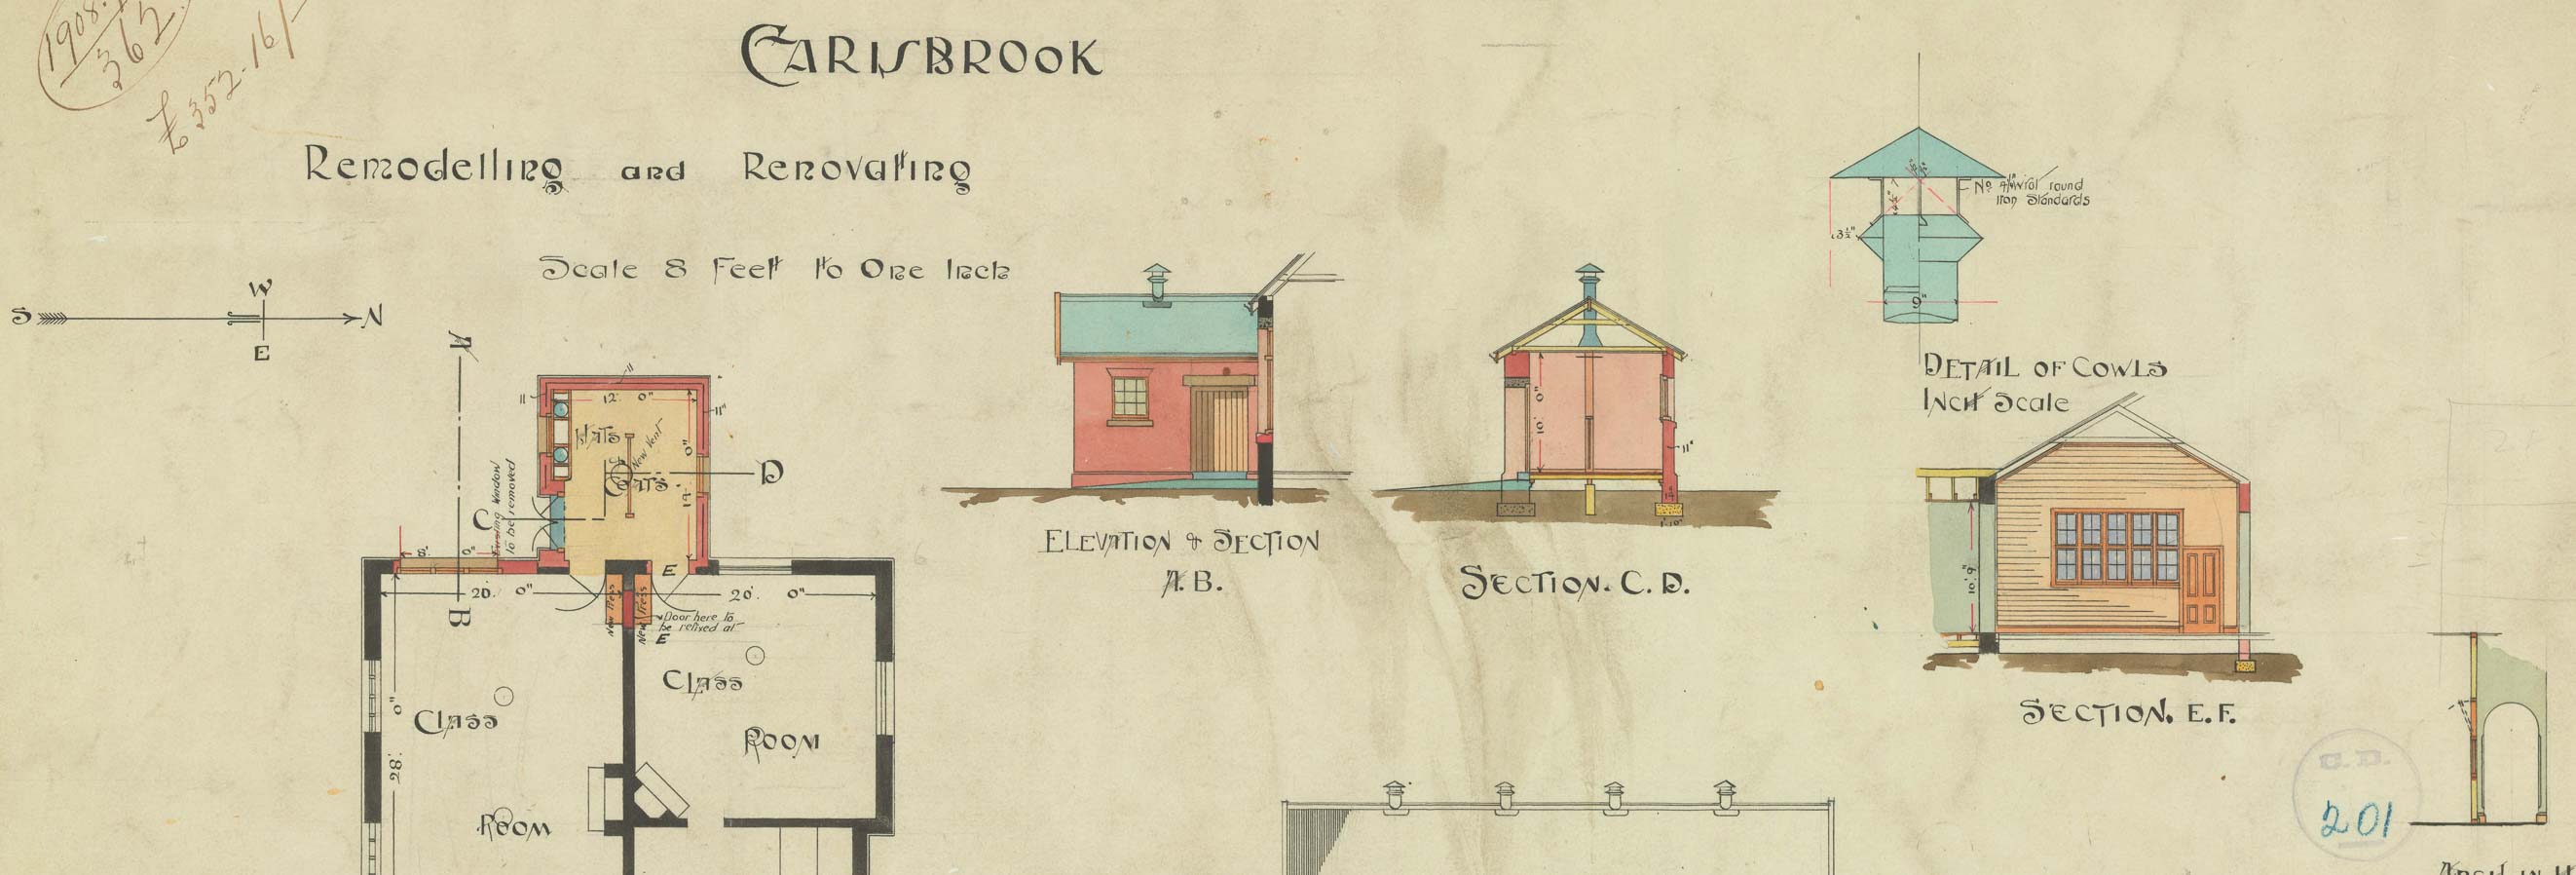 Colour hand drawn building plan of Carisbrook school remodeling and renovating